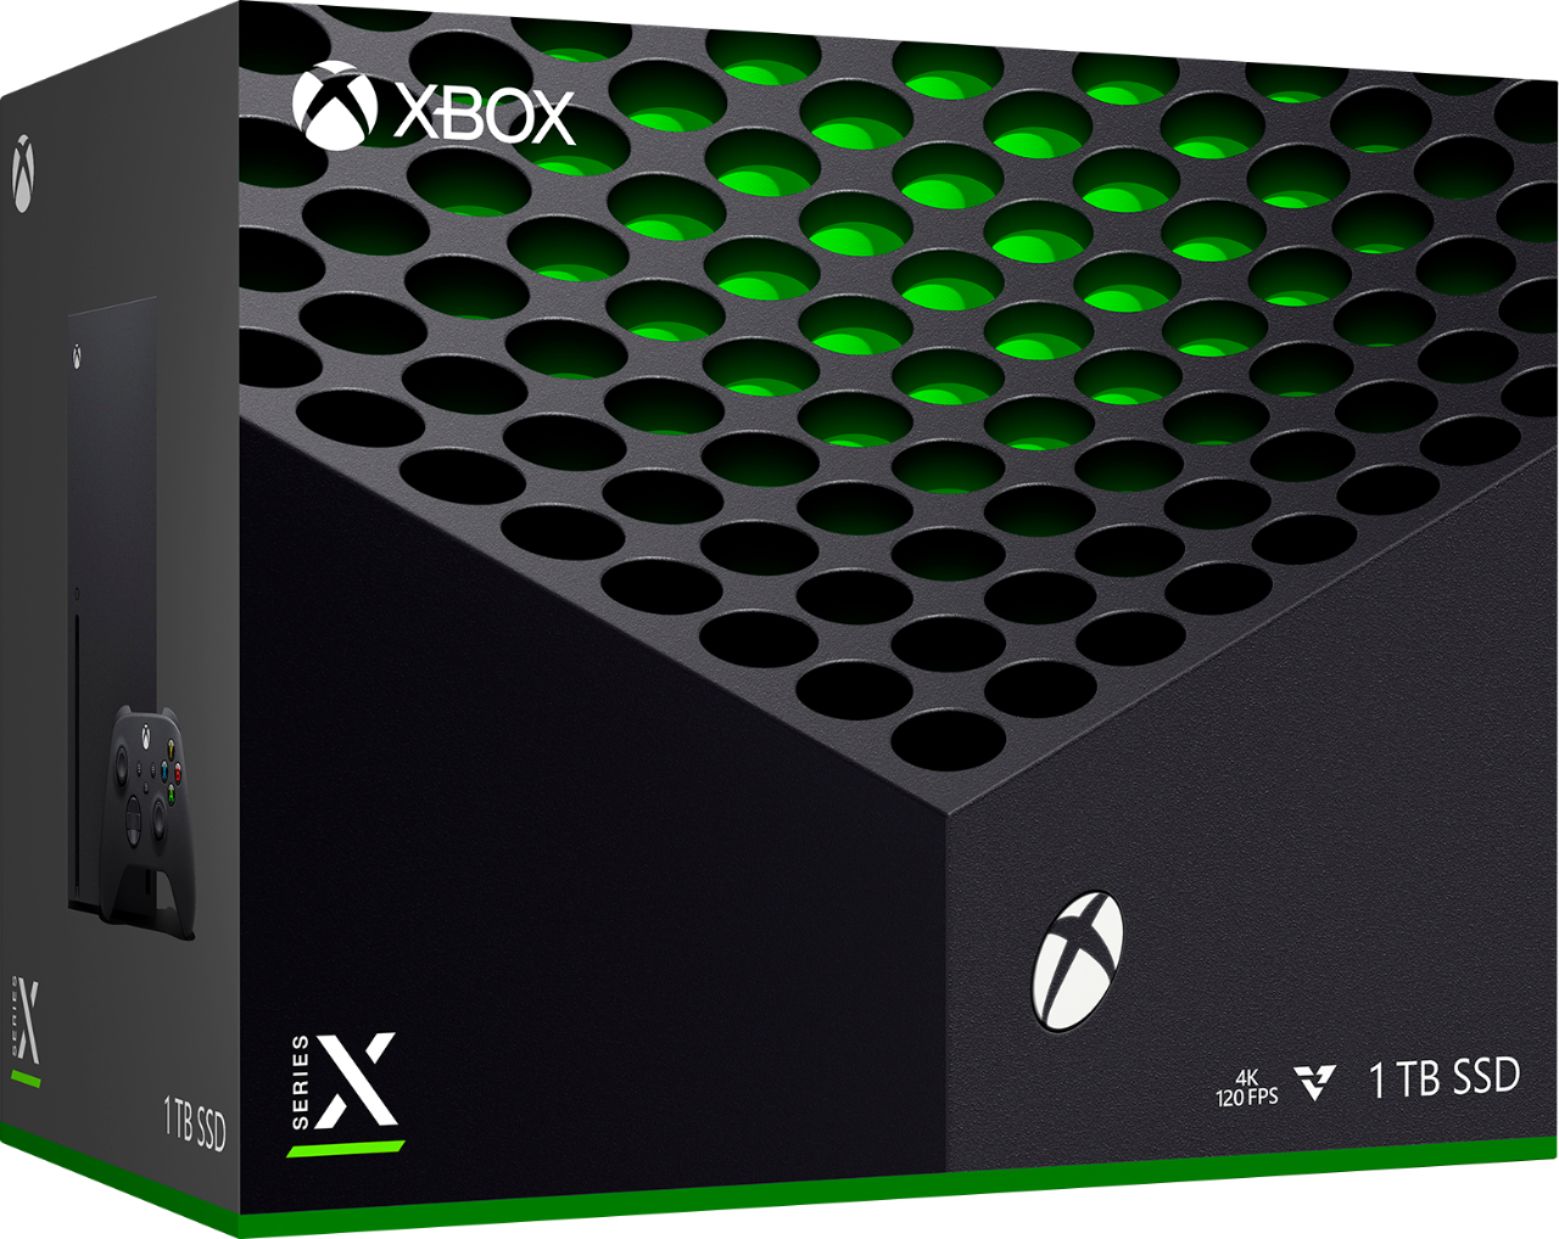 2020 New Xbox Console - 1TB SSD Black X Version with Disc Drive - image 1 of 6